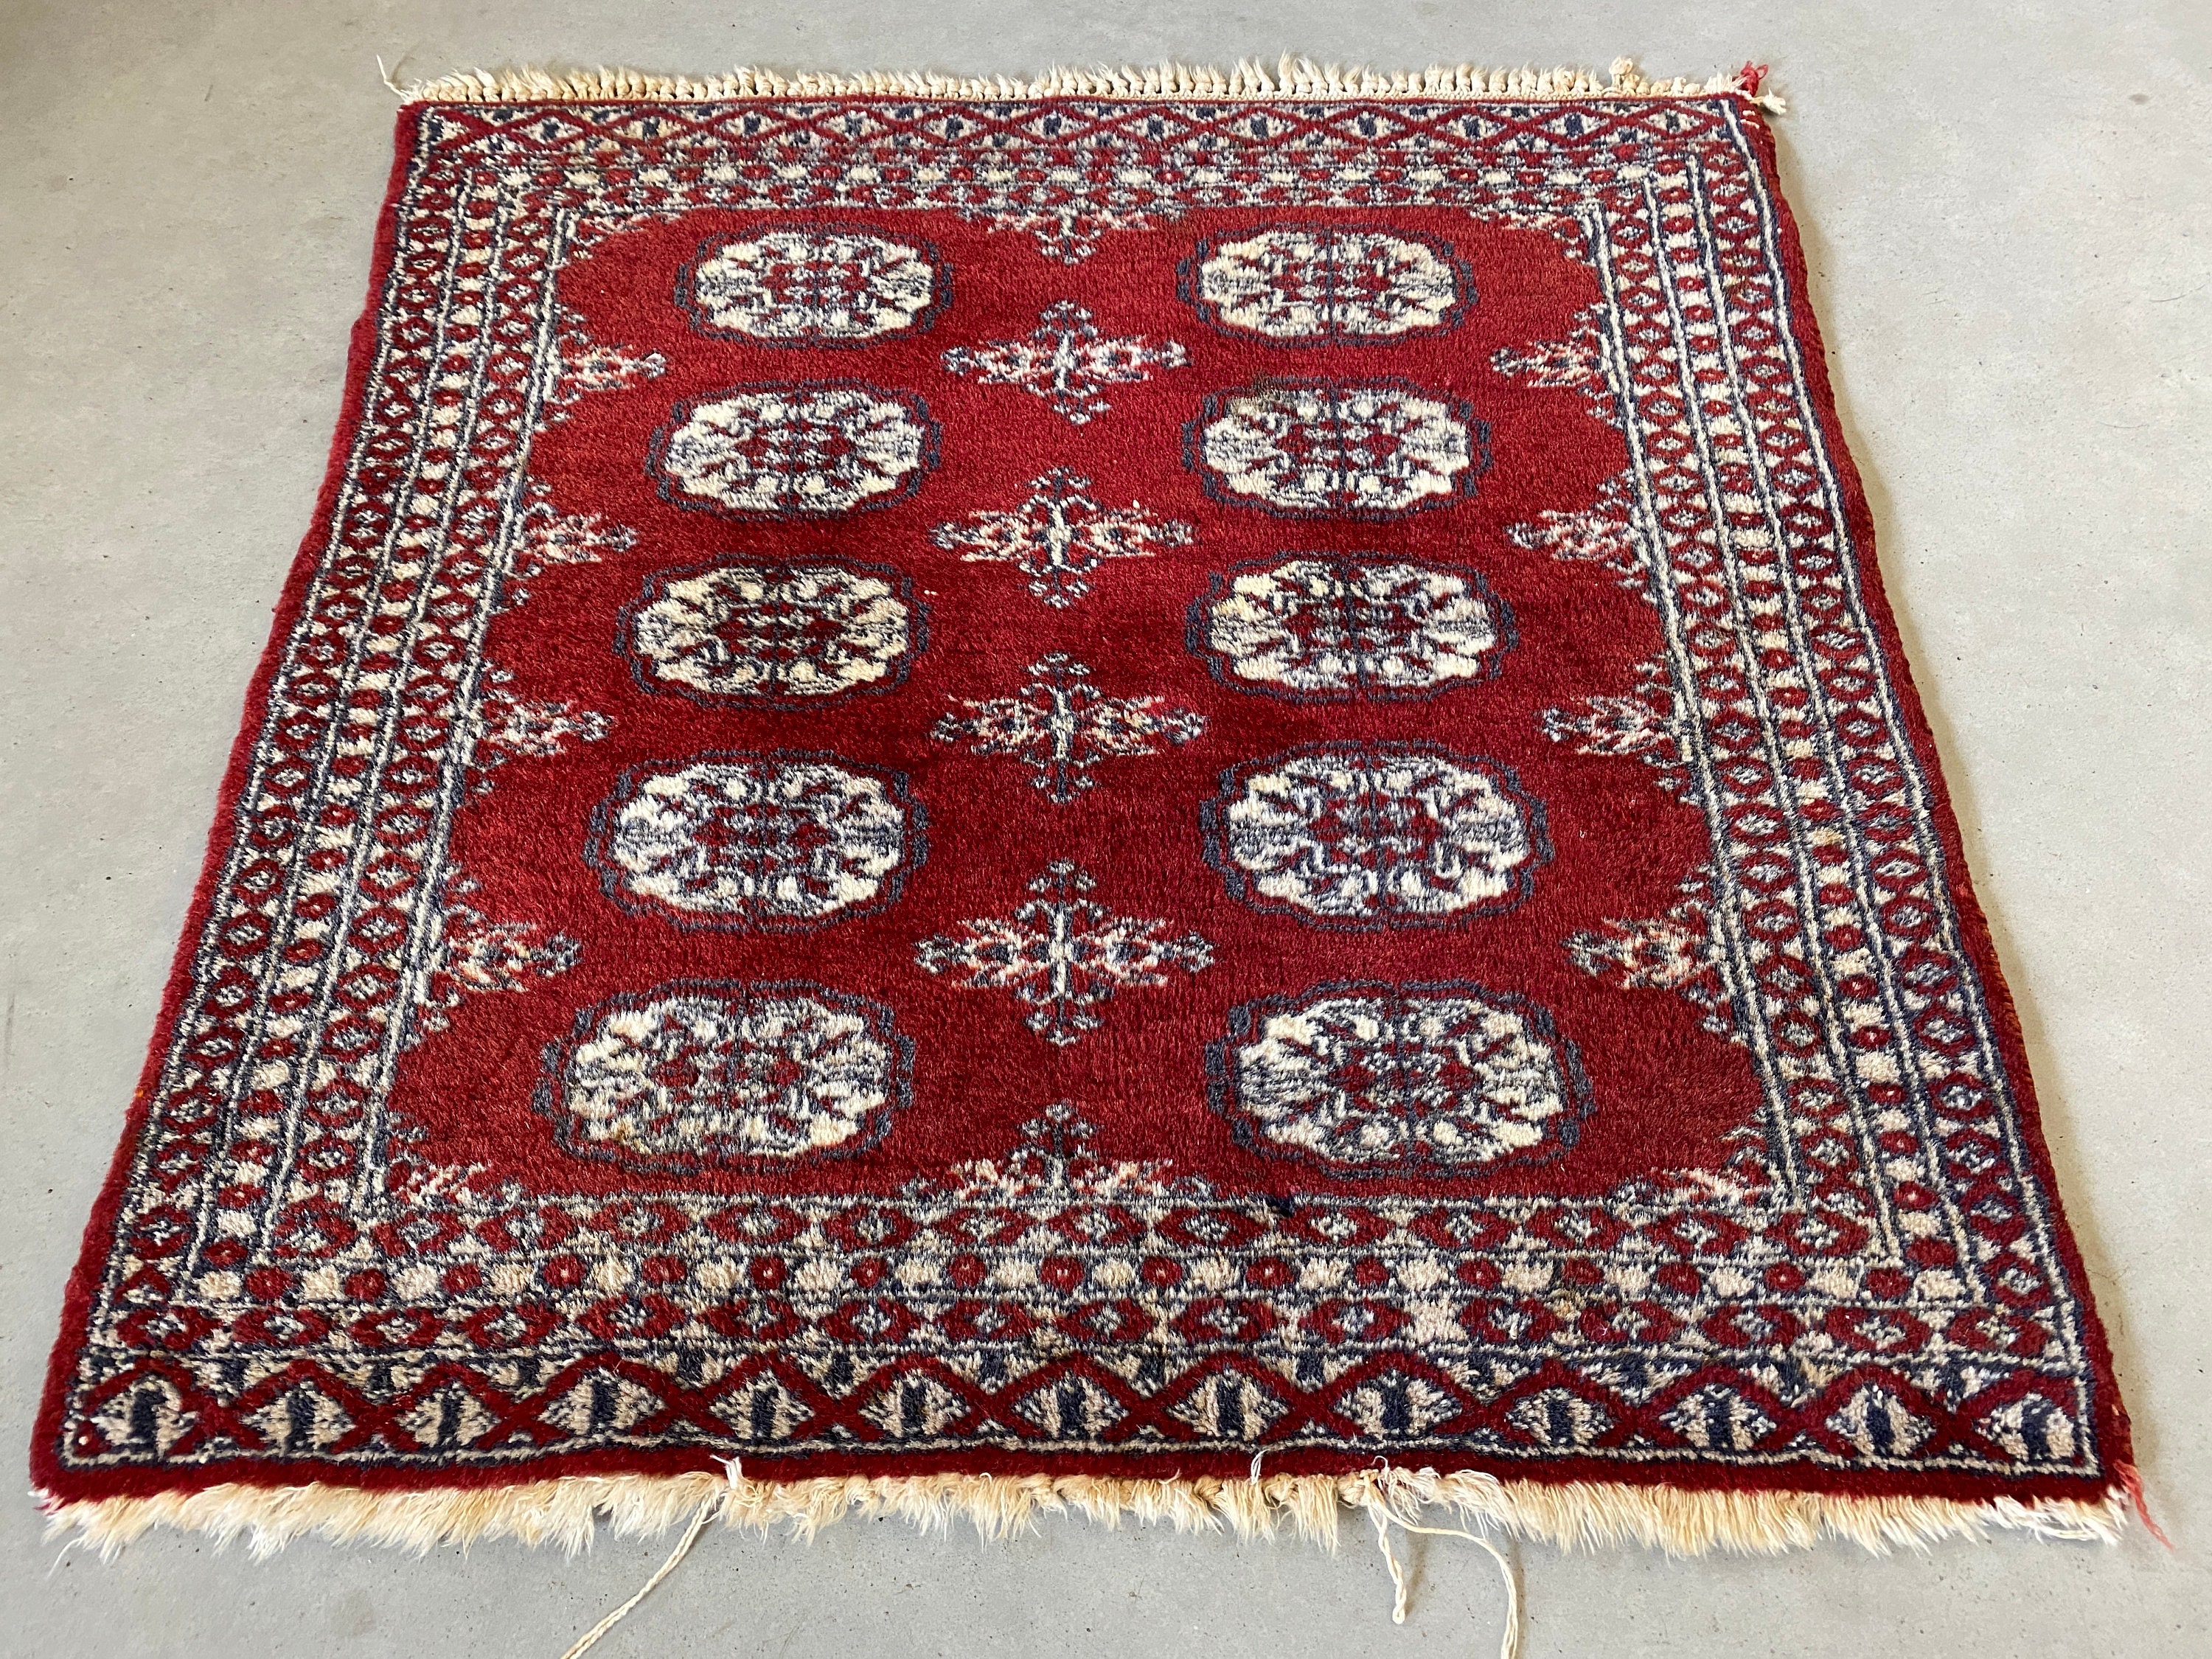 Small Oriental Rug, Small Carpet, Made of Wool, Hand Knotted, Red, Blue,  Beige, Brown and More Accents, 1960s Mid Century Modern Style 